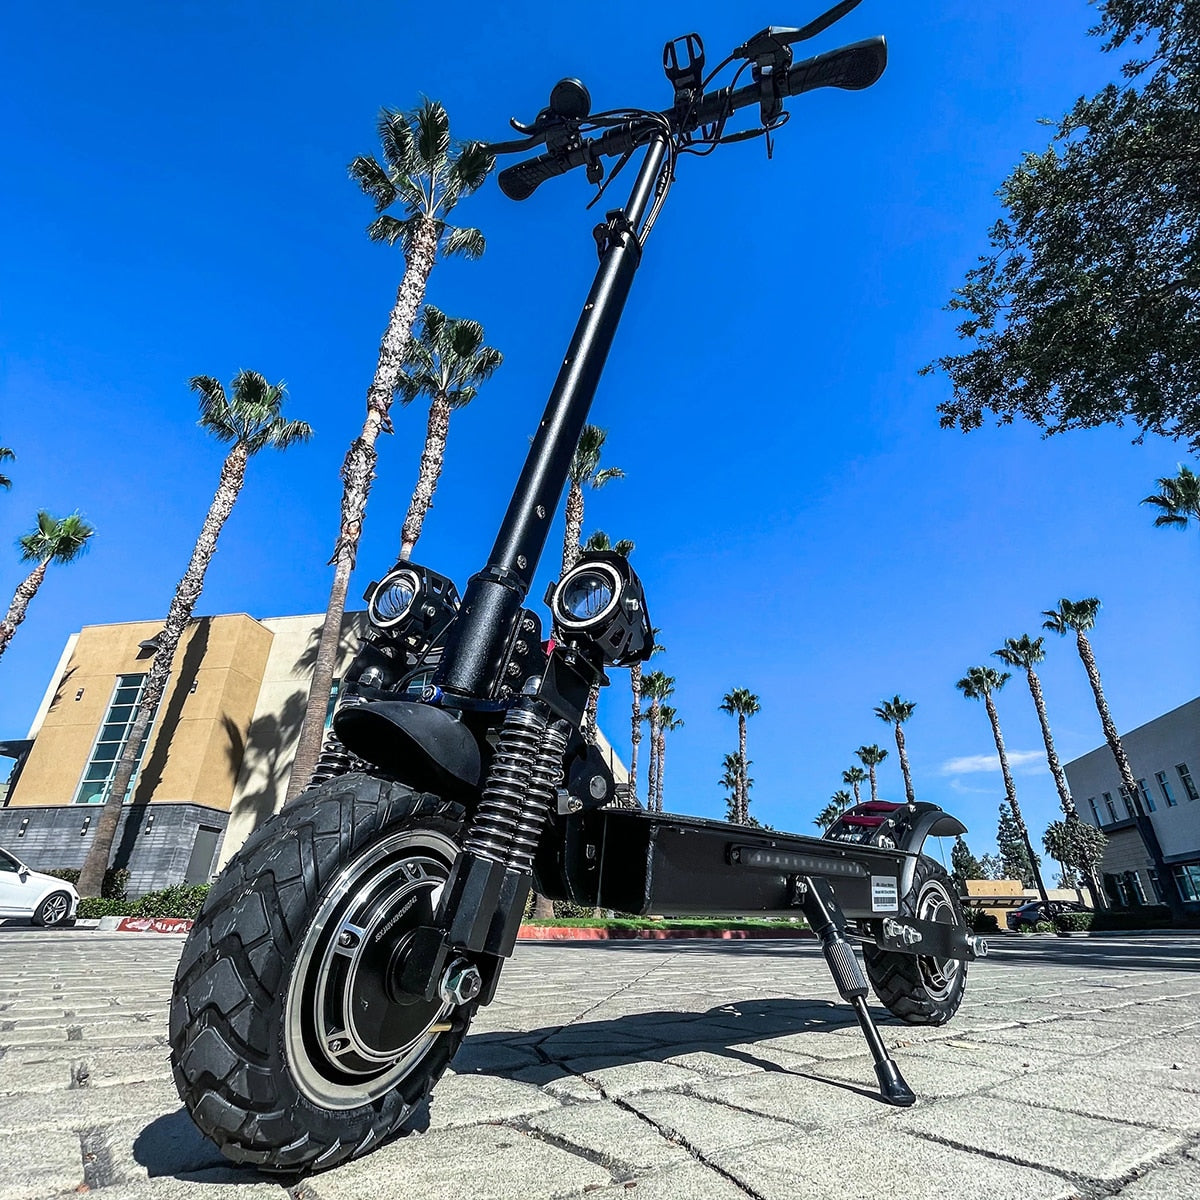 2600 Watt Dual Motors E Scooter with 20 Amp Hours Lithium Battery